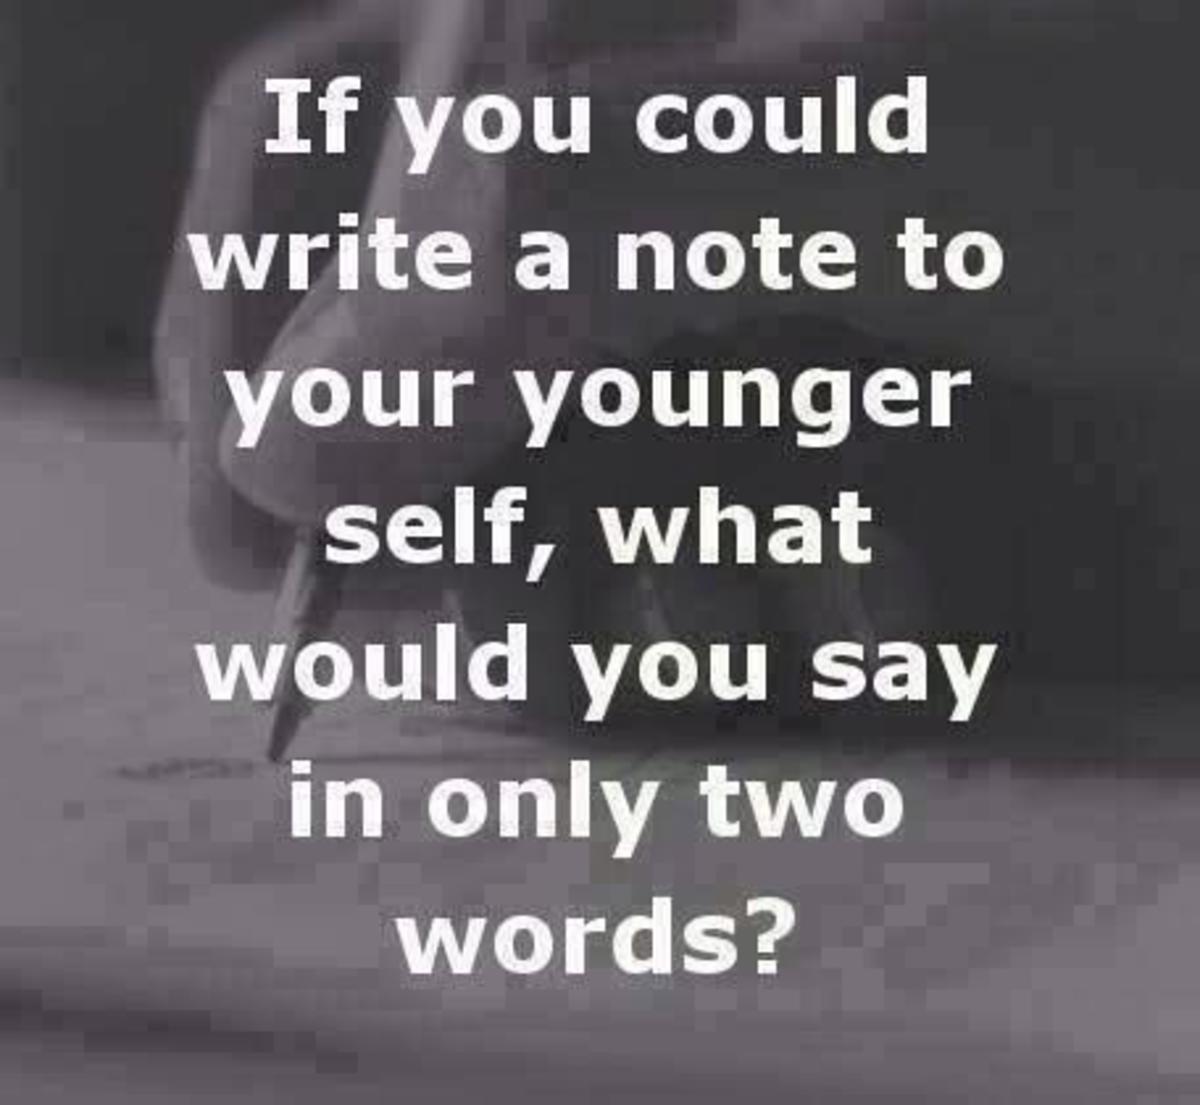 httppammorrishubpagescomhubthe-advice-i-would-give-to-my-younger-self-if-i-could